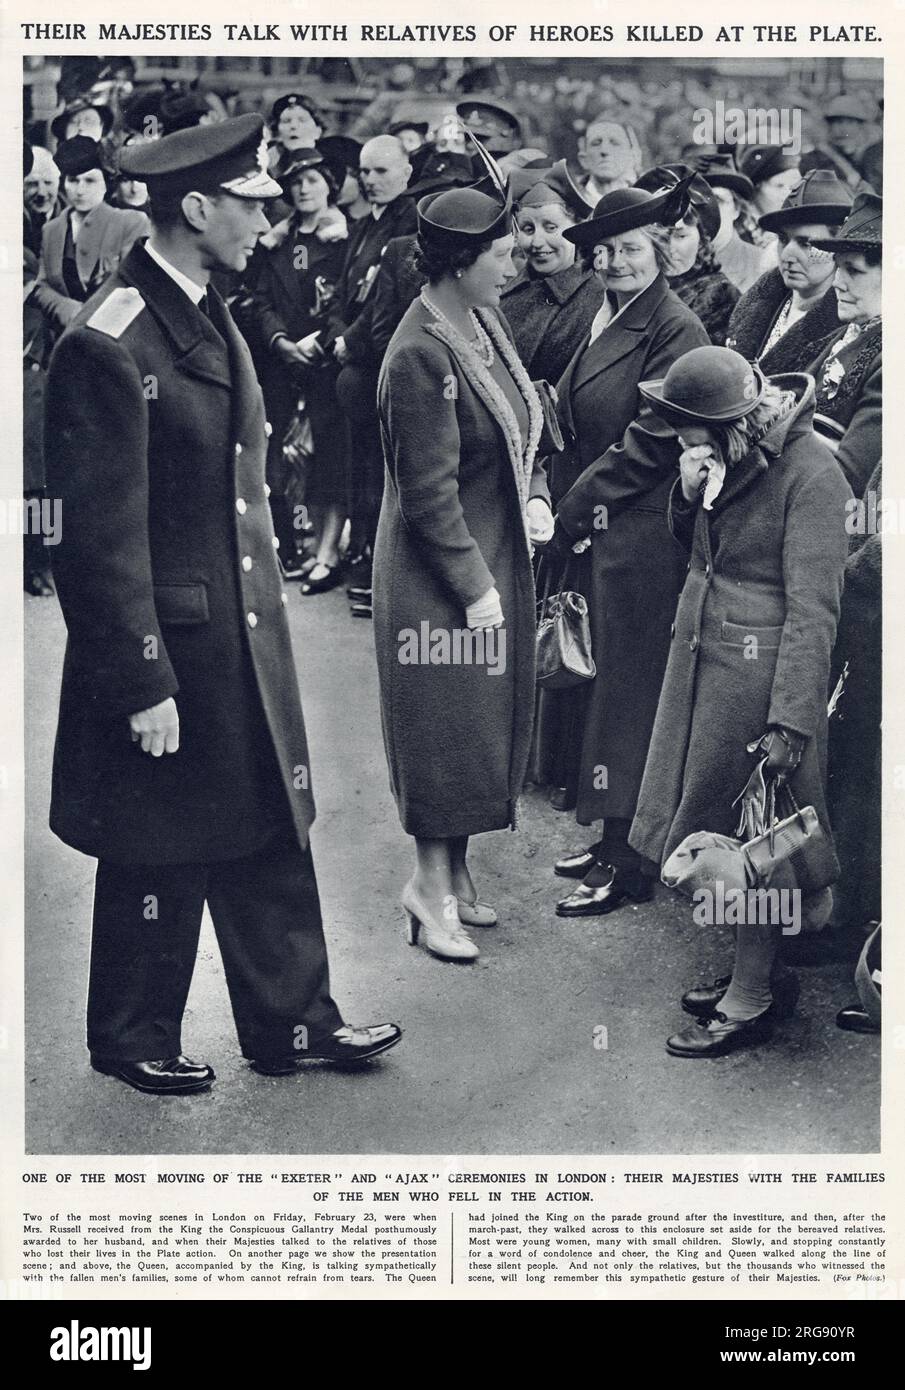 King George VI and Queen Elizabeth consort visiting bereaved relatives of heroes killed in the Battle of the River Plate, fought in the South Atlantic on 13 December 1939 as the first naval battle of the Second World War. Stock Photo